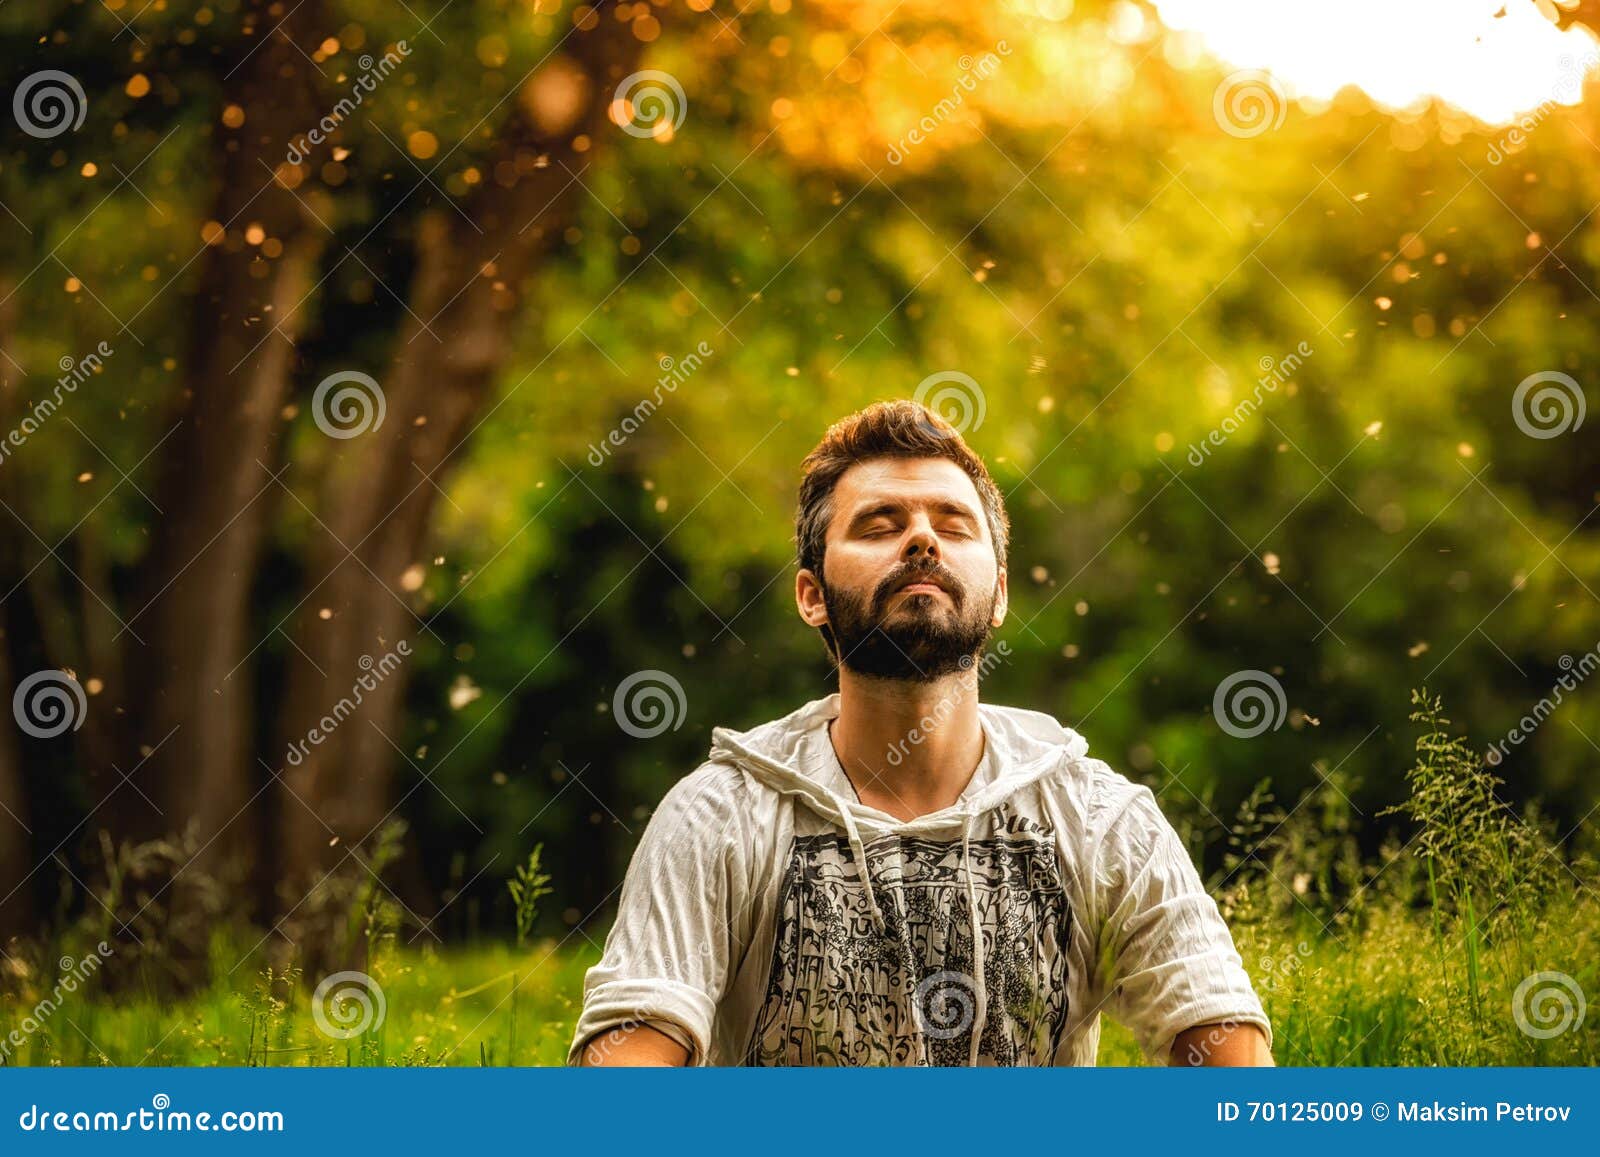 a bearded man is meditating on green grass in the park